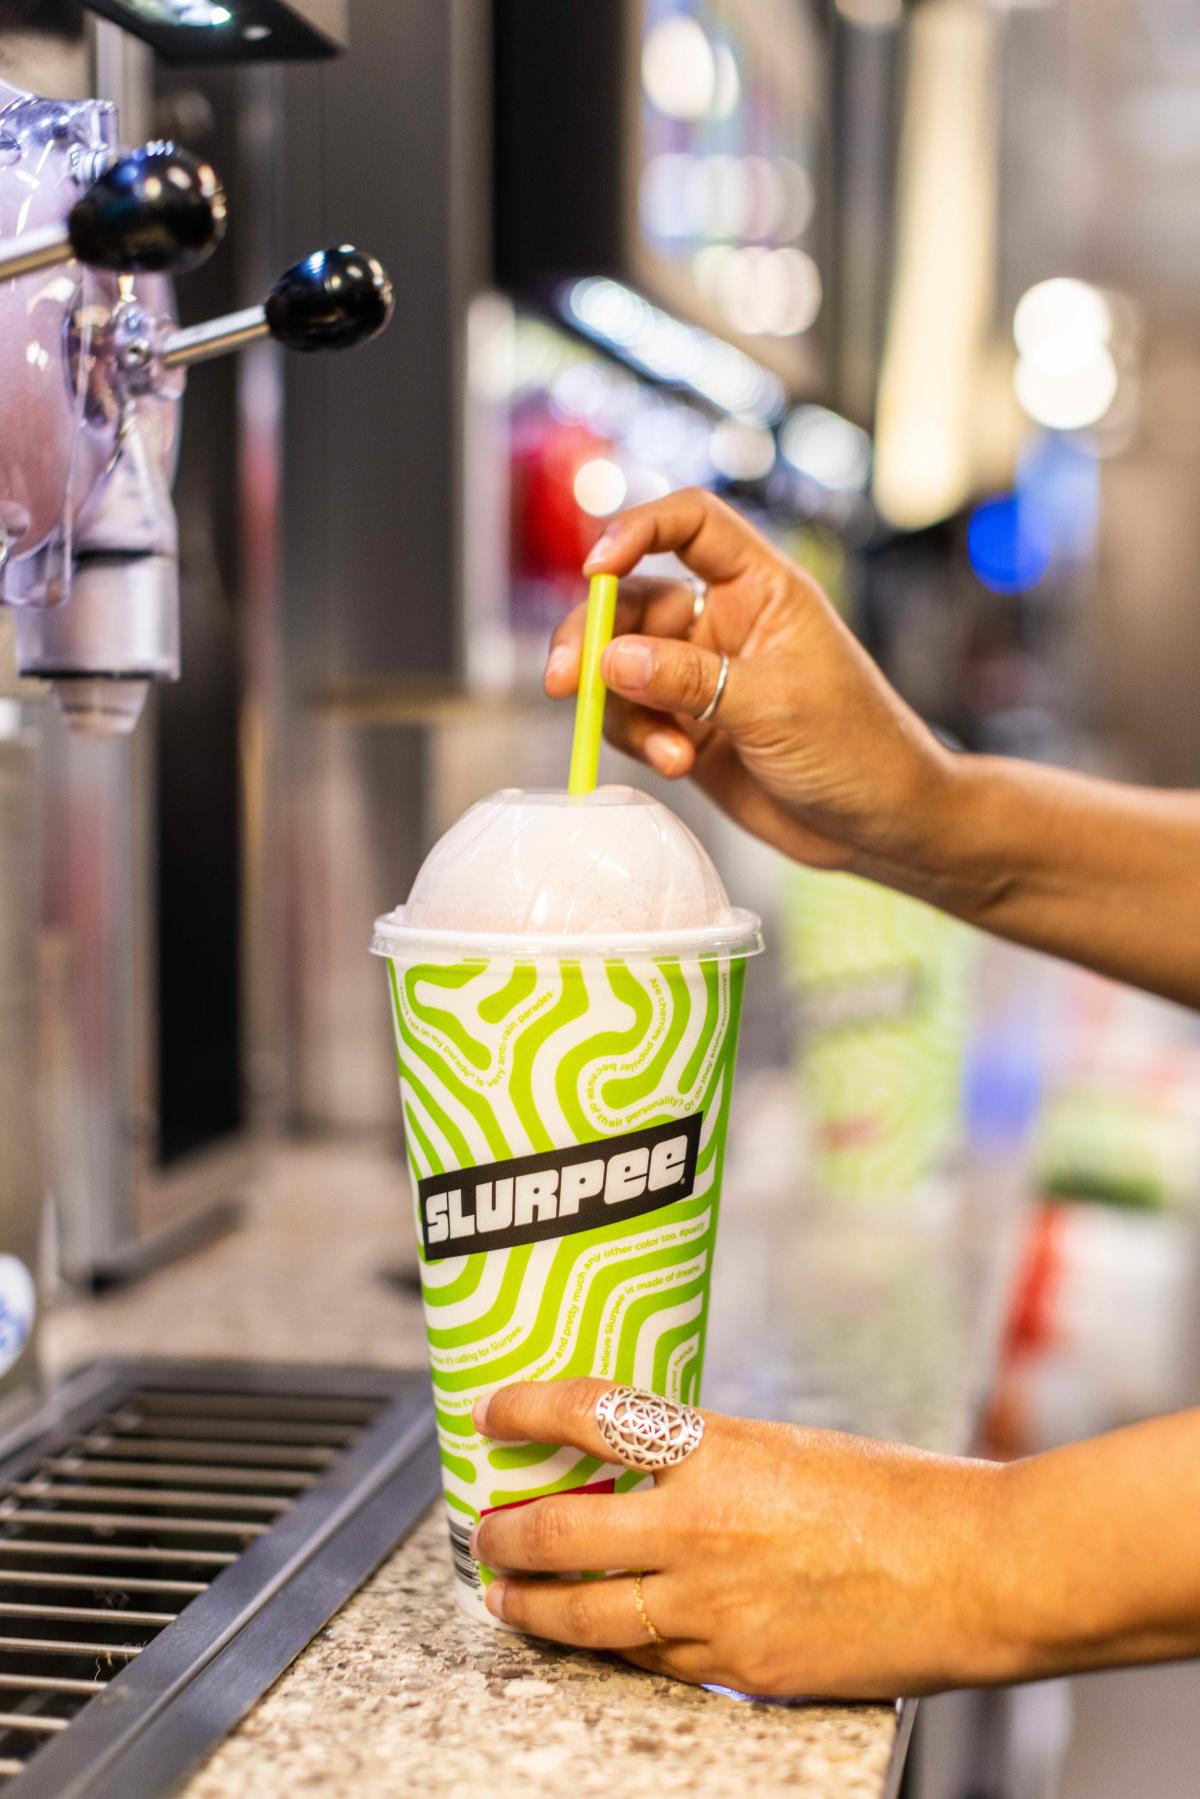 Saturday is 'Bring Your Own Cup Day' at 7Eleven. Get your Slurpee on